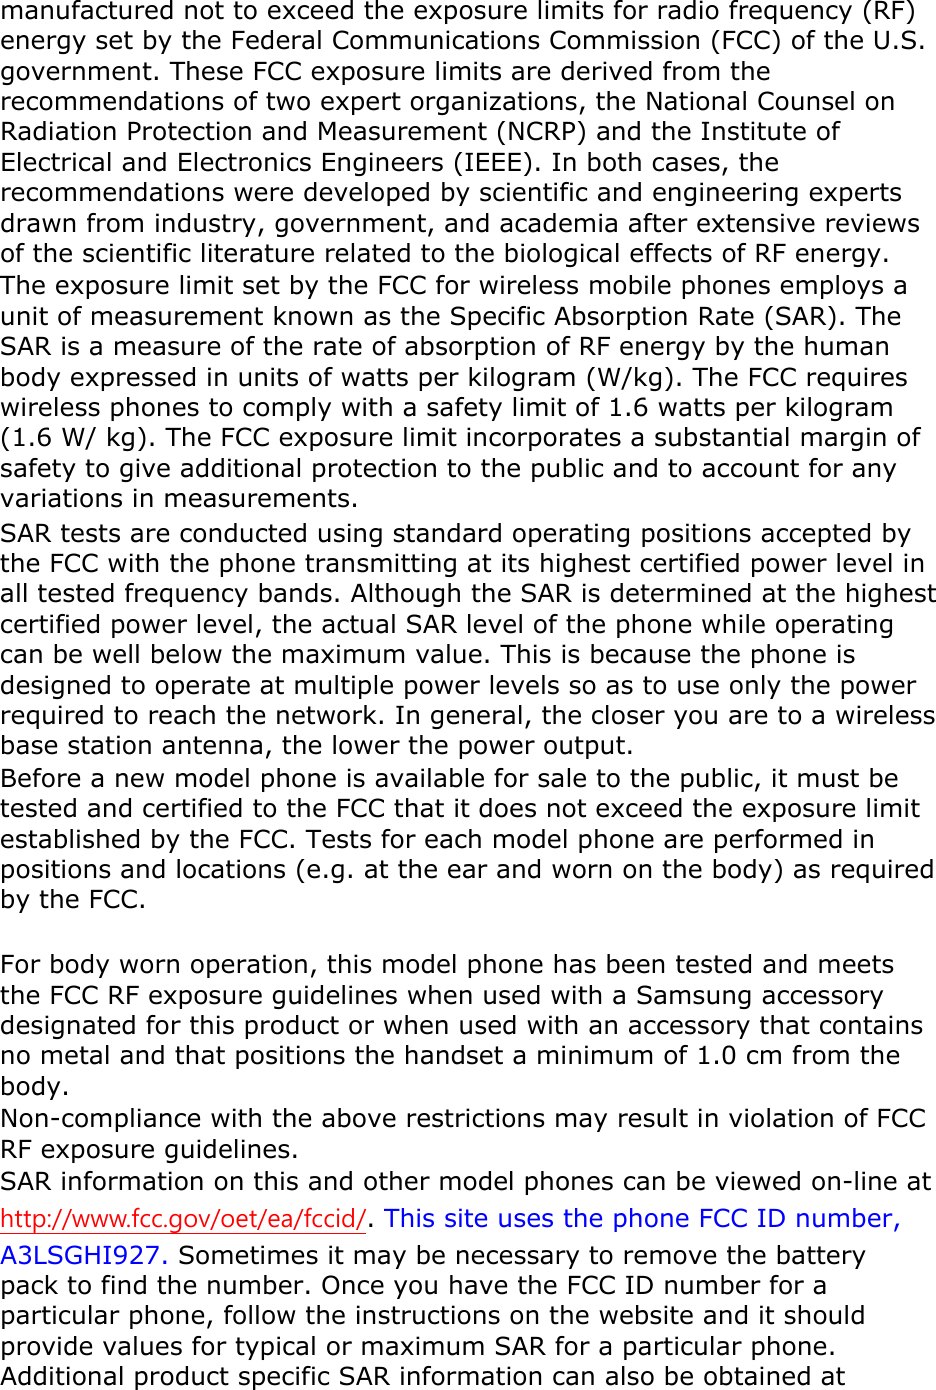 manufactured not to exceed the exposure limits for radio frequency (RF) energy set by the Federal Communications Commission (FCC) of the U.S. government. These FCC exposure limits are derived from the recommendations of two expert organizations, the National Counsel on Radiation Protection and Measurement (NCRP) and the Institute of Electrical and Electronics Engineers (IEEE). In both cases, the recommendations were developed by scientific and engineering experts drawn from industry, government, and academia after extensive reviews of the scientific literature related to the biological effects of RF energy. The exposure limit set by the FCC for wireless mobile phones employs a unit of measurement known as the Specific Absorption Rate (SAR). The SAR is a measure of the rate of absorption of RF energy by the human body expressed in units of watts per kilogram (W/kg). The FCC requires wireless phones to comply with a safety limit of 1.6 watts per kilogram (1.6 W/ kg). The FCC exposure limit incorporates a substantial margin of safety to give additional protection to the public and to account for any variations in measurements. SAR tests are conducted using standard operating positions accepted by the FCC with the phone transmitting at its highest certified power level in all tested frequency bands. Although the SAR is determined at the highest certified power level, the actual SAR level of the phone while operating can be well below the maximum value. This is because the phone is designed to operate at multiple power levels so as to use only the power required to reach the network. In general, the closer you are to a wireless base station antenna, the lower the power output. Before a new model phone is available for sale to the public, it must be tested and certified to the FCC that it does not exceed the exposure limit established by the FCC. Tests for each model phone are performed in positions and locations (e.g. at the ear and worn on the body) as required by the FCC.      For body worn operation, this model phone has been tested and meets the FCC RF exposure guidelines when used with a Samsung accessory designated for this product or when used with an accessory that contains no metal and that positions the handset a minimum of 1.0 cm from the body.  Non-compliance with the above restrictions may result in violation of FCC RF exposure guidelines. SAR information on this and other model phones can be viewed on-line at http://www.fcc.gov/oet/ea/fccid/. This site uses the phone FCC ID number, A3LSGHI927. Sometimes it may be necessary to remove the battery pack to find the number. Once you have the FCC ID number for a particular phone, follow the instructions on the website and it should provide values for typical or maximum SAR for a particular phone. Additional product specific SAR information can also be obtained at 